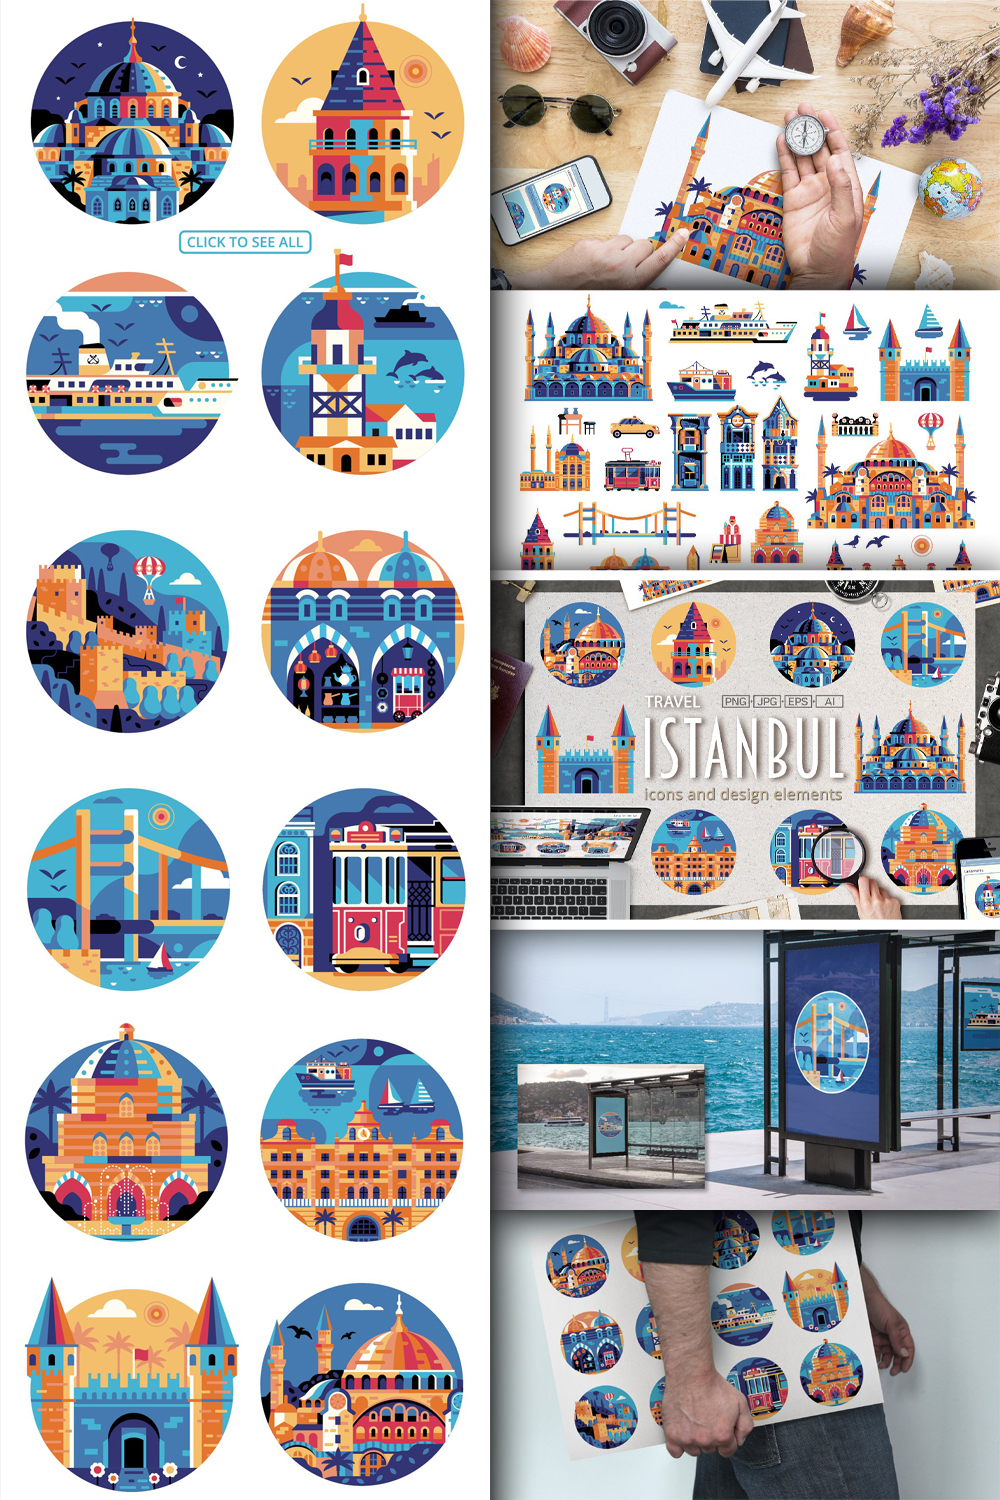 Travel istanbul icons and elements of pinterest.